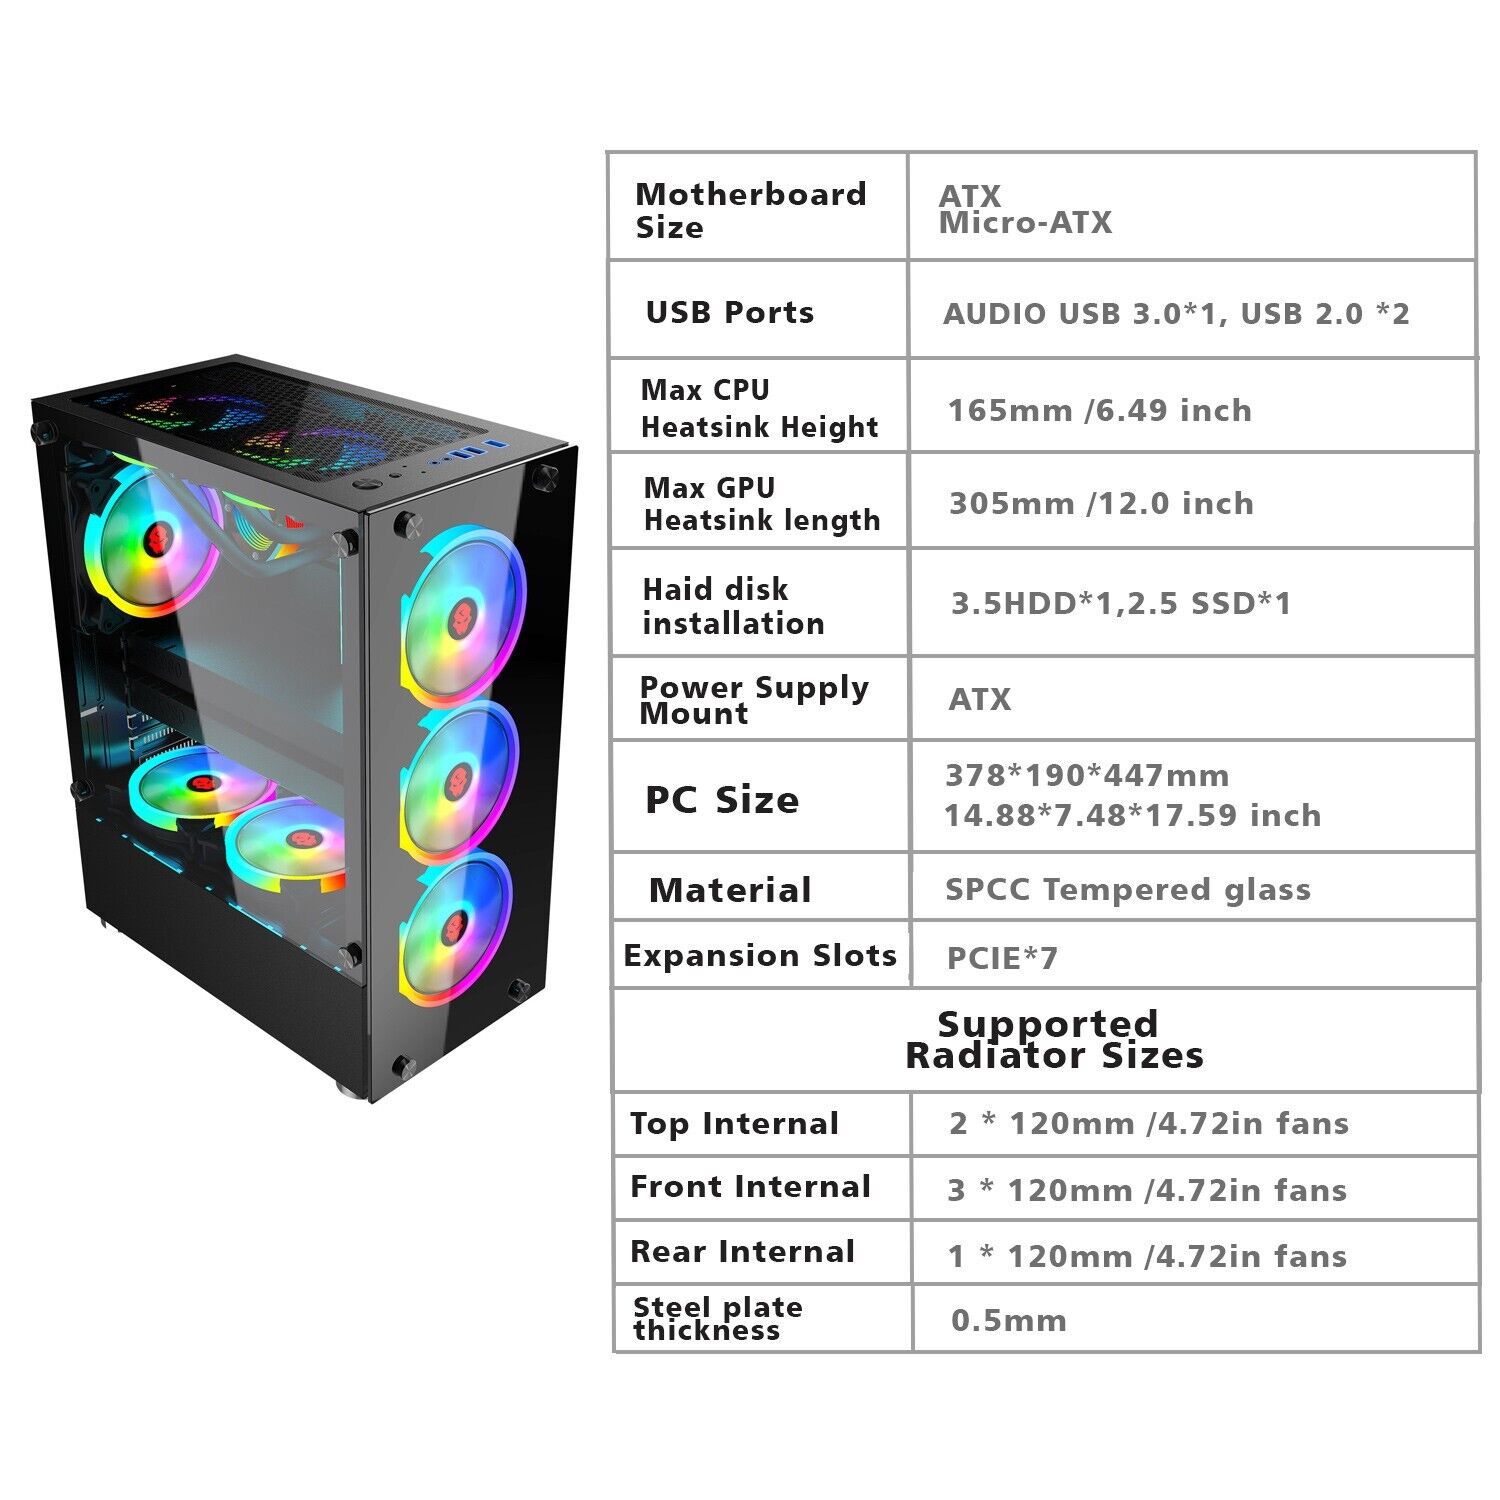 Phoenix ATX/M-ATX/ITX Gaming PC Desktop Computer Case Black with Side Tempered Glass Panels with 5 Fan Support